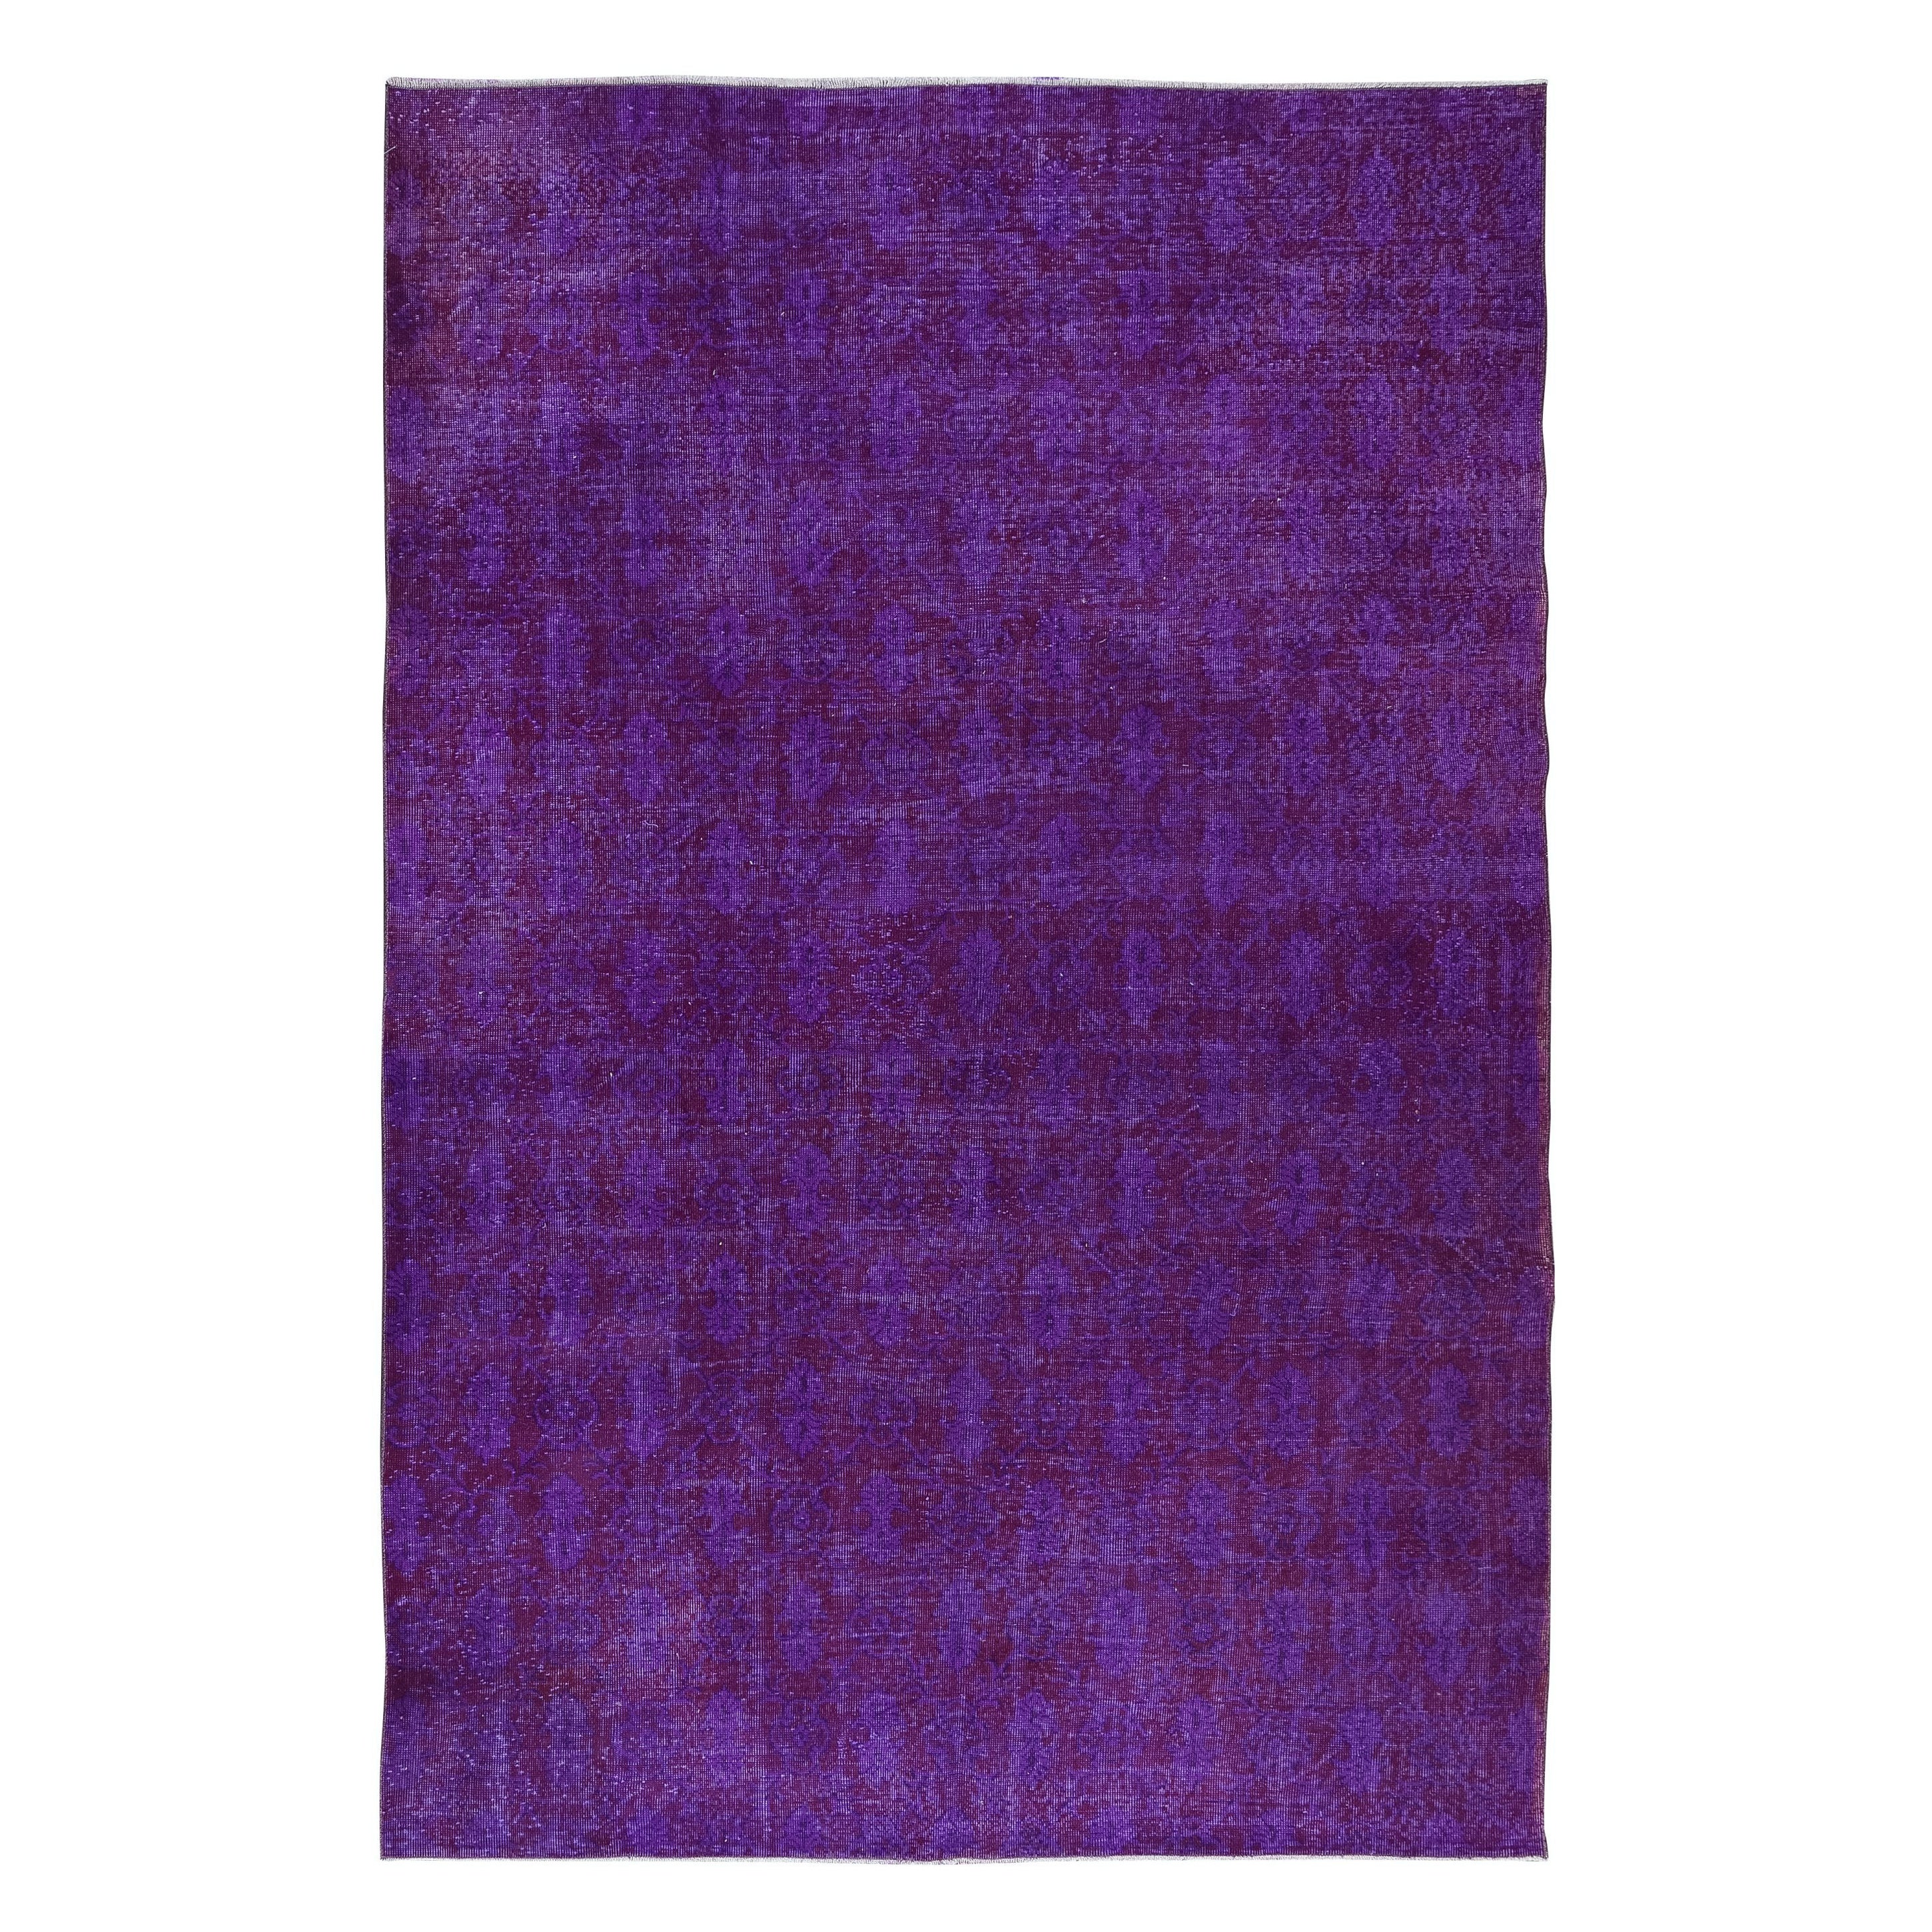 7.3x11 Ft Large Modern Handmade Turkish Wool Area Rug in Purple Colors For Sale